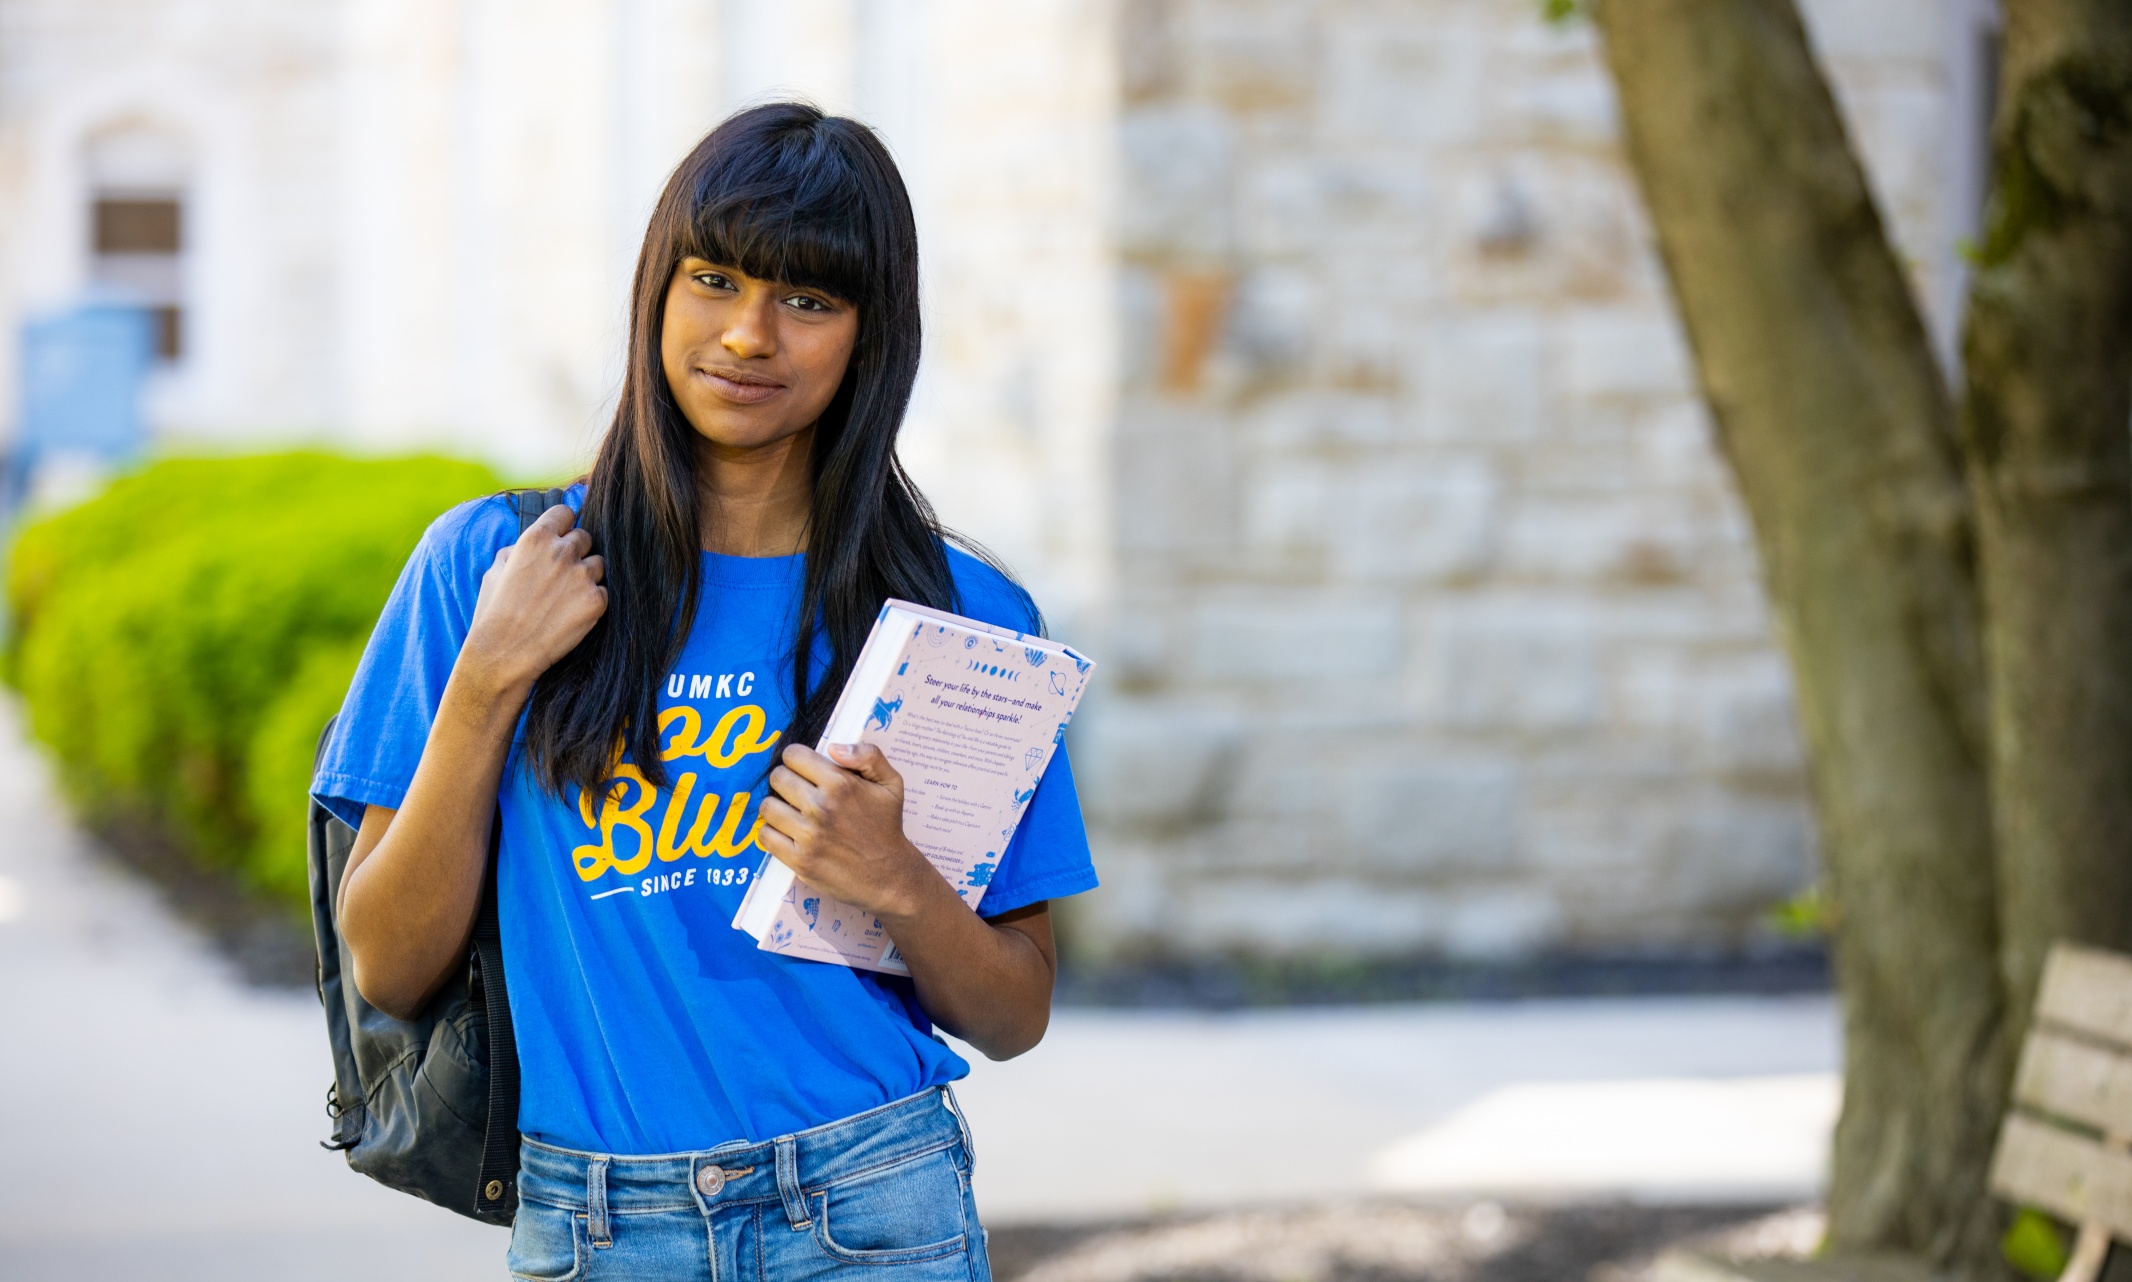 Krithika with her bookbag and a book outside on campus